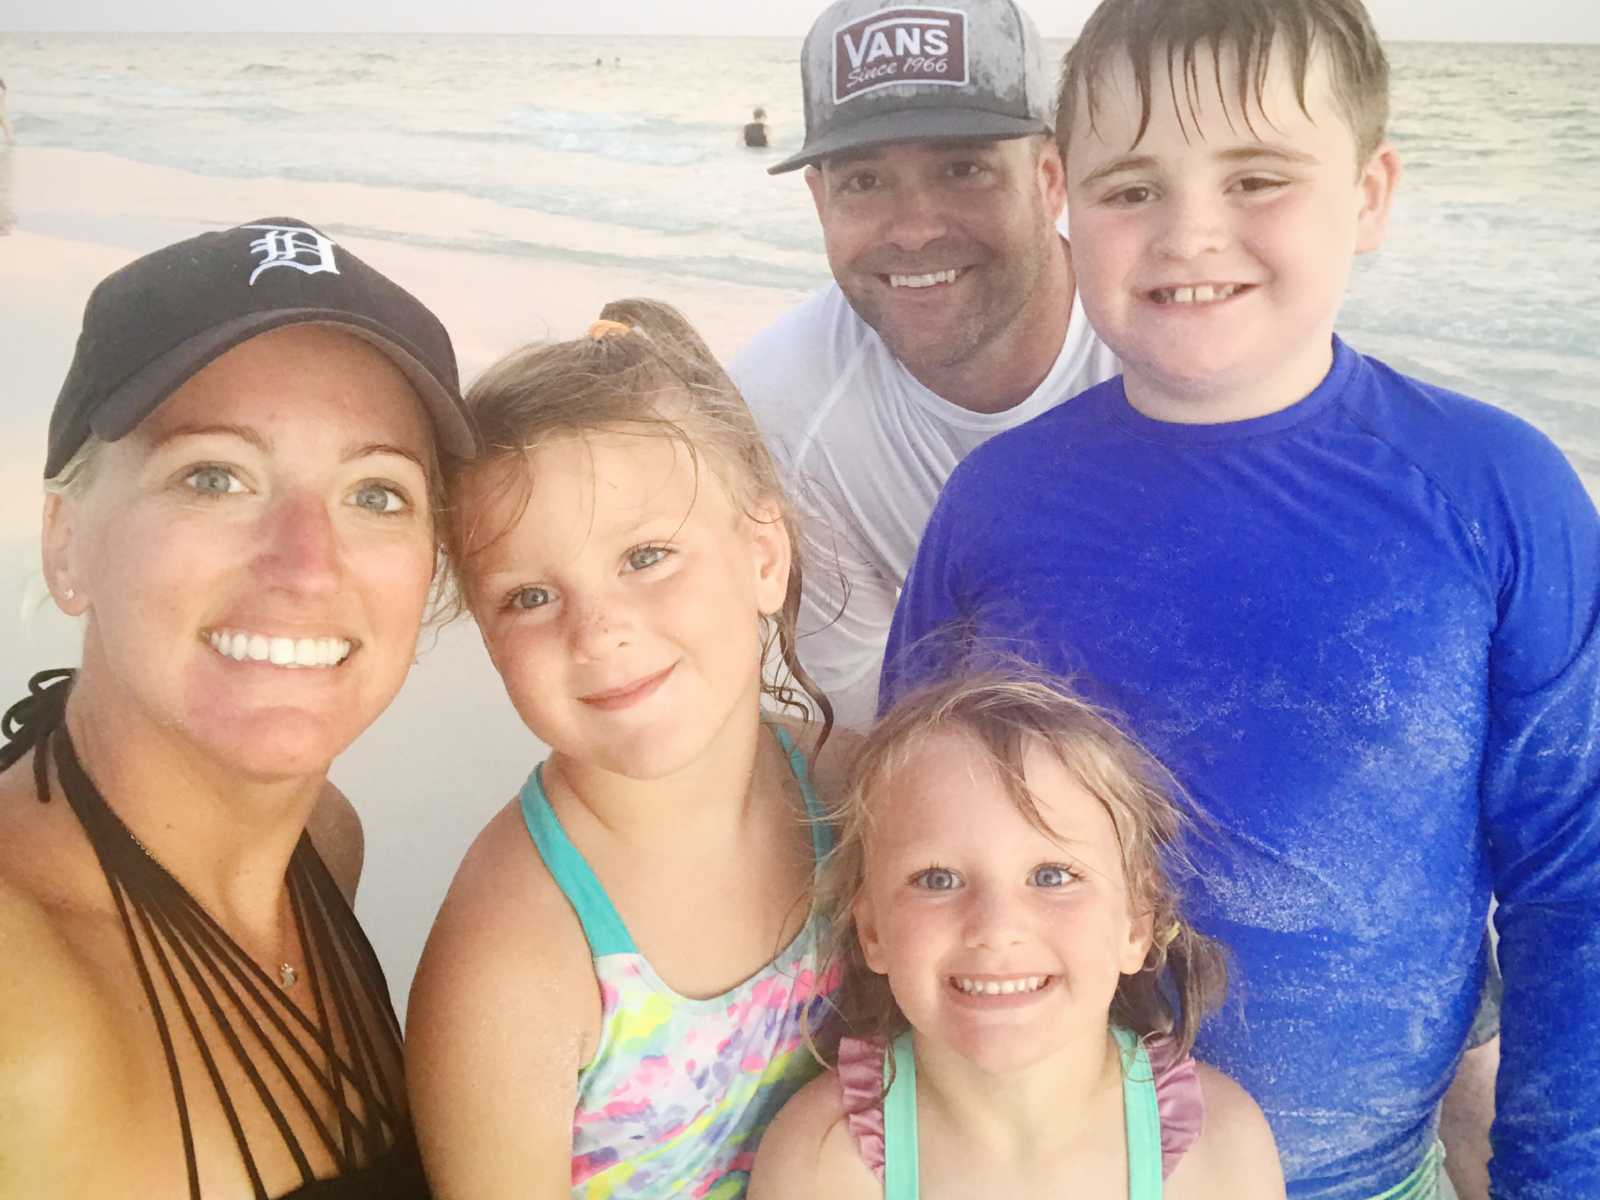 widowed mother smiles in selfie on beach in bathing suits next to two daughters and widowed boyfriend and his son